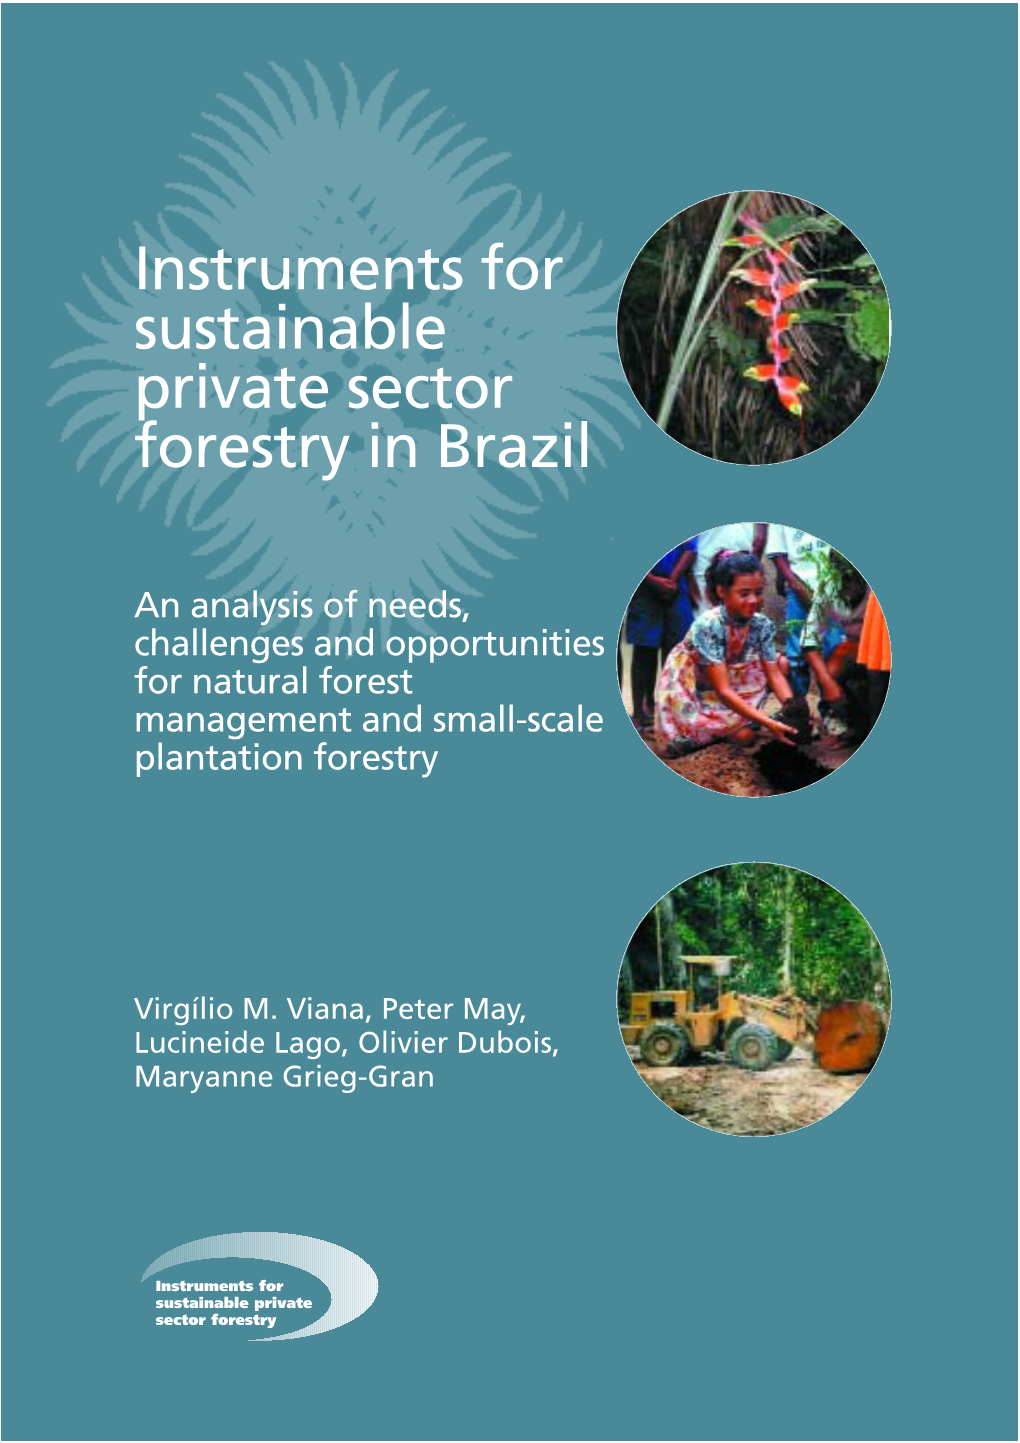 Instruments for Sustainable Private Sector Forestry in Brazil